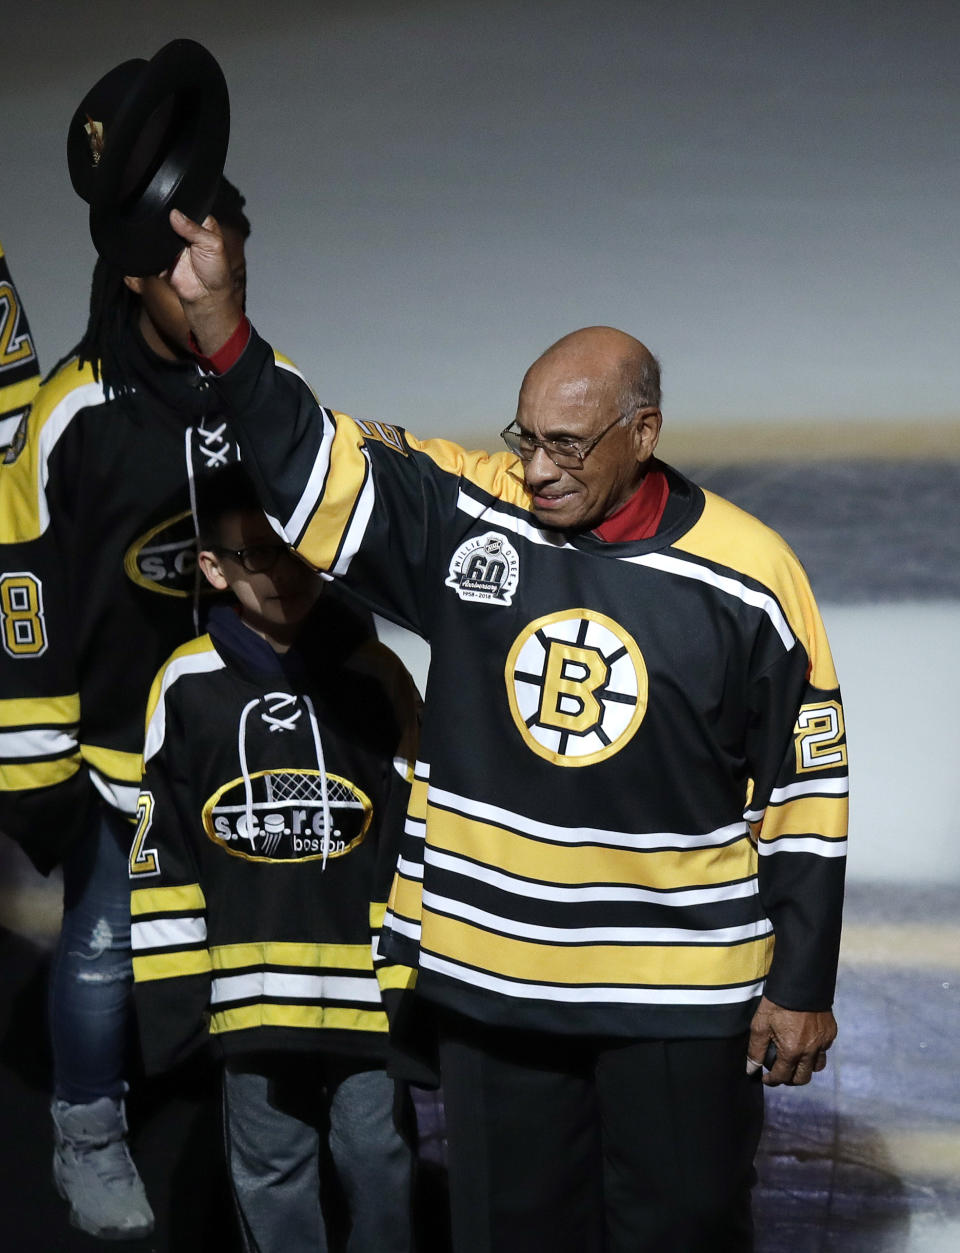 FILE - Former Boston Bruins' Willie O'Ree tips his hat as he is honored prior to the first period of an NHL hockey game against the Montreal Canadiens in Boston, in this Wednesday, Jan. 17, 2018, file photo. The Boston Bruins say they will retire the jersey of Willie O’Ree, who broke the NHL’s color barrier. O’Ree will have his No. 22 jersey honored prior to the Bruins’ Feb. 18 game against the New Jersey Devils. He became the league’s first Black player when he suited up for Boston on Jan. 18, 1958 against the Montreal Canadiens, despite being legally blind in one eye. (AP Photo/Charles Krupa, File)